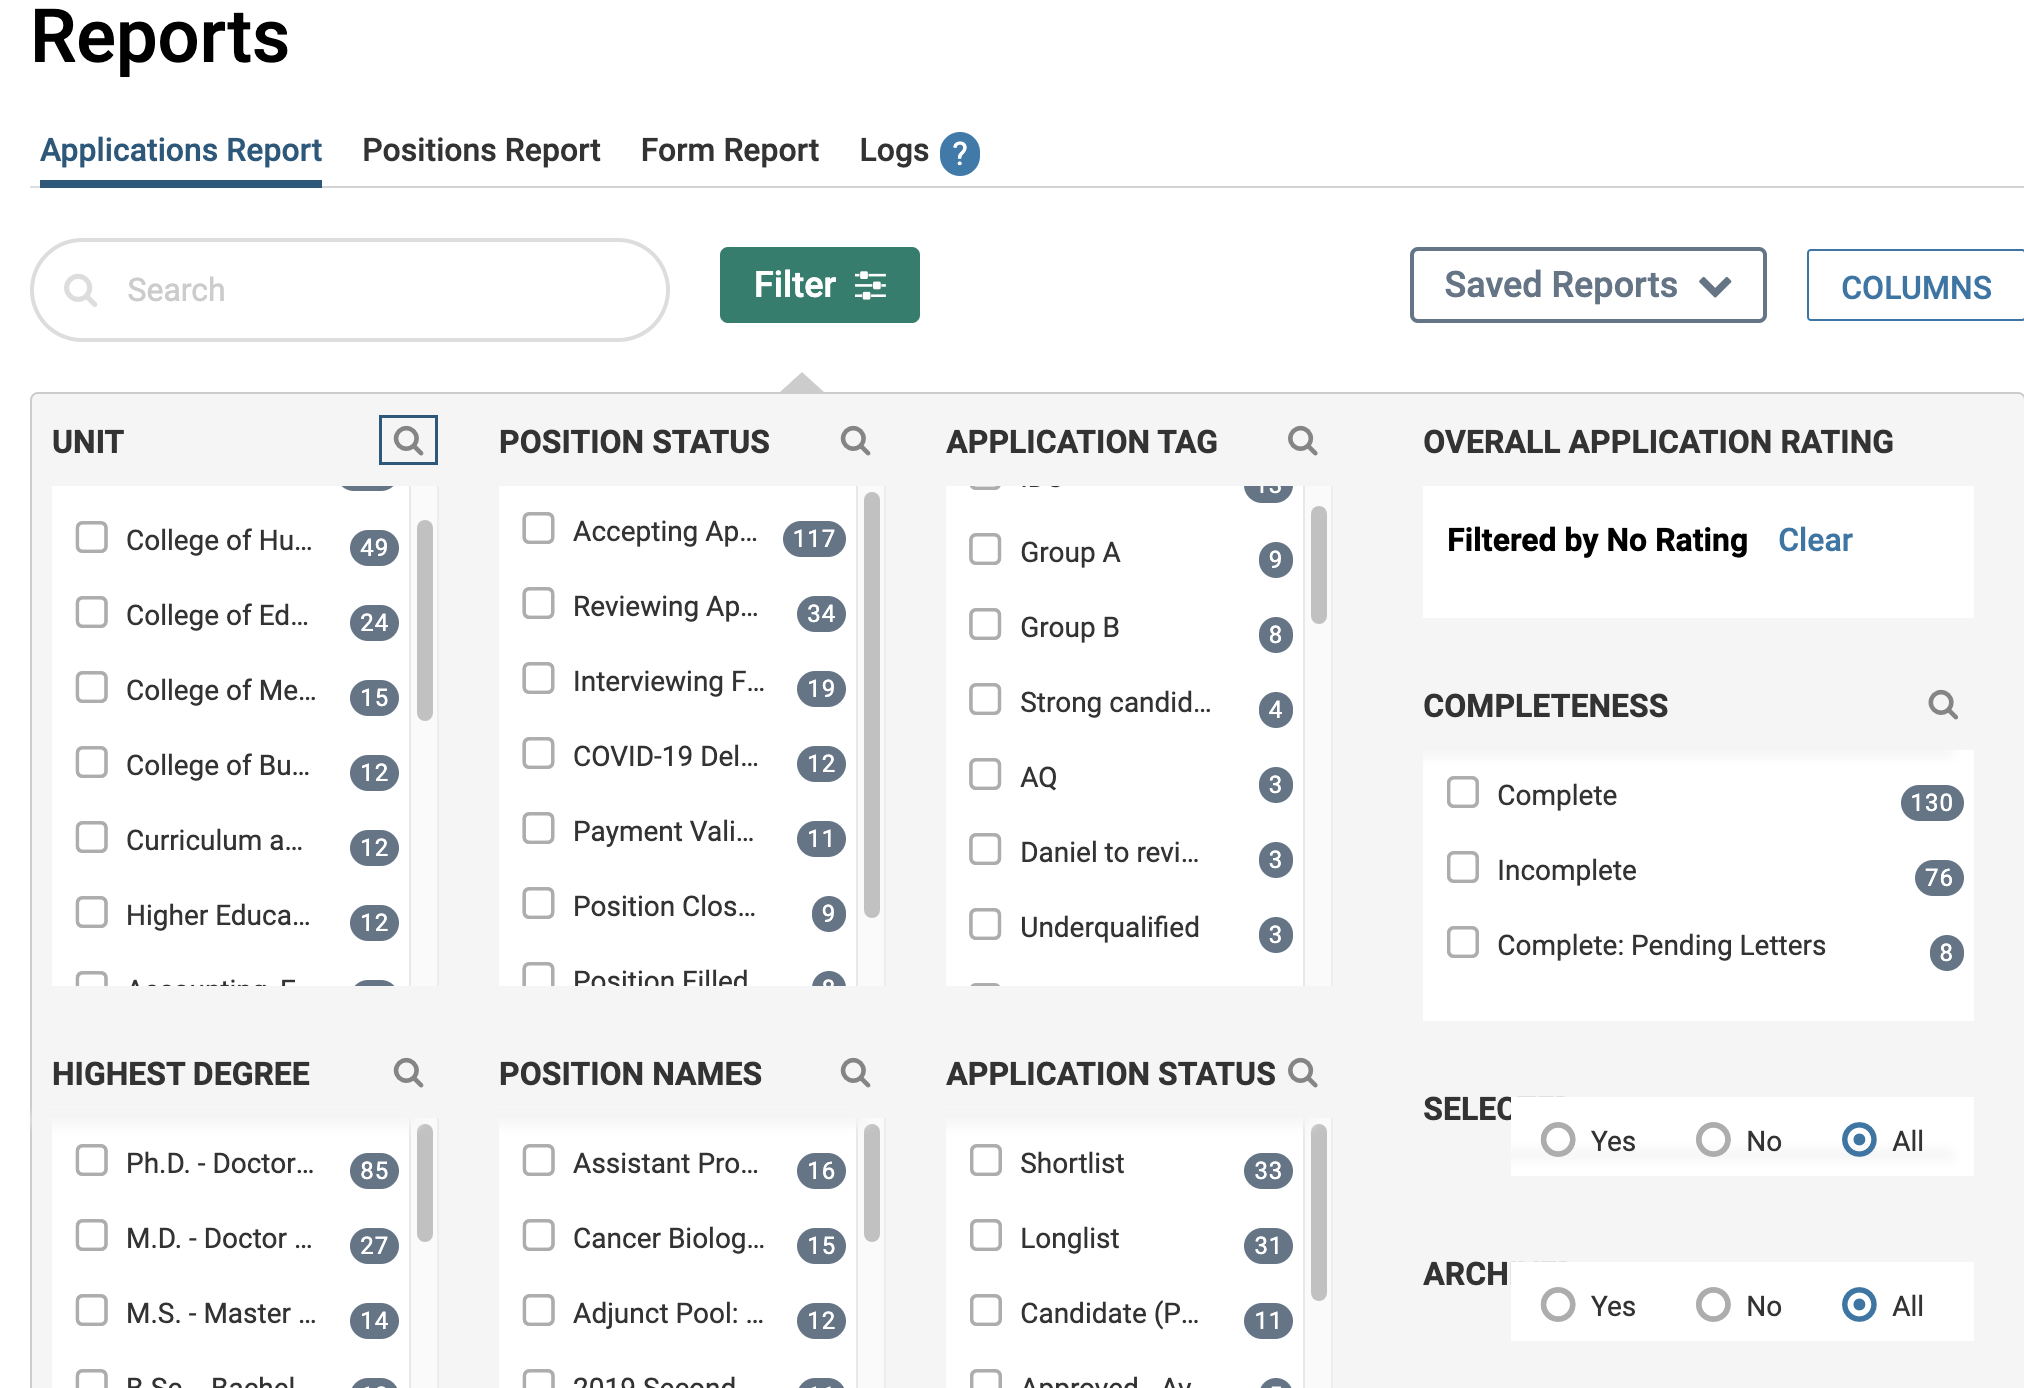 Reports page with Applications Report tab selected and list of filters displayed below